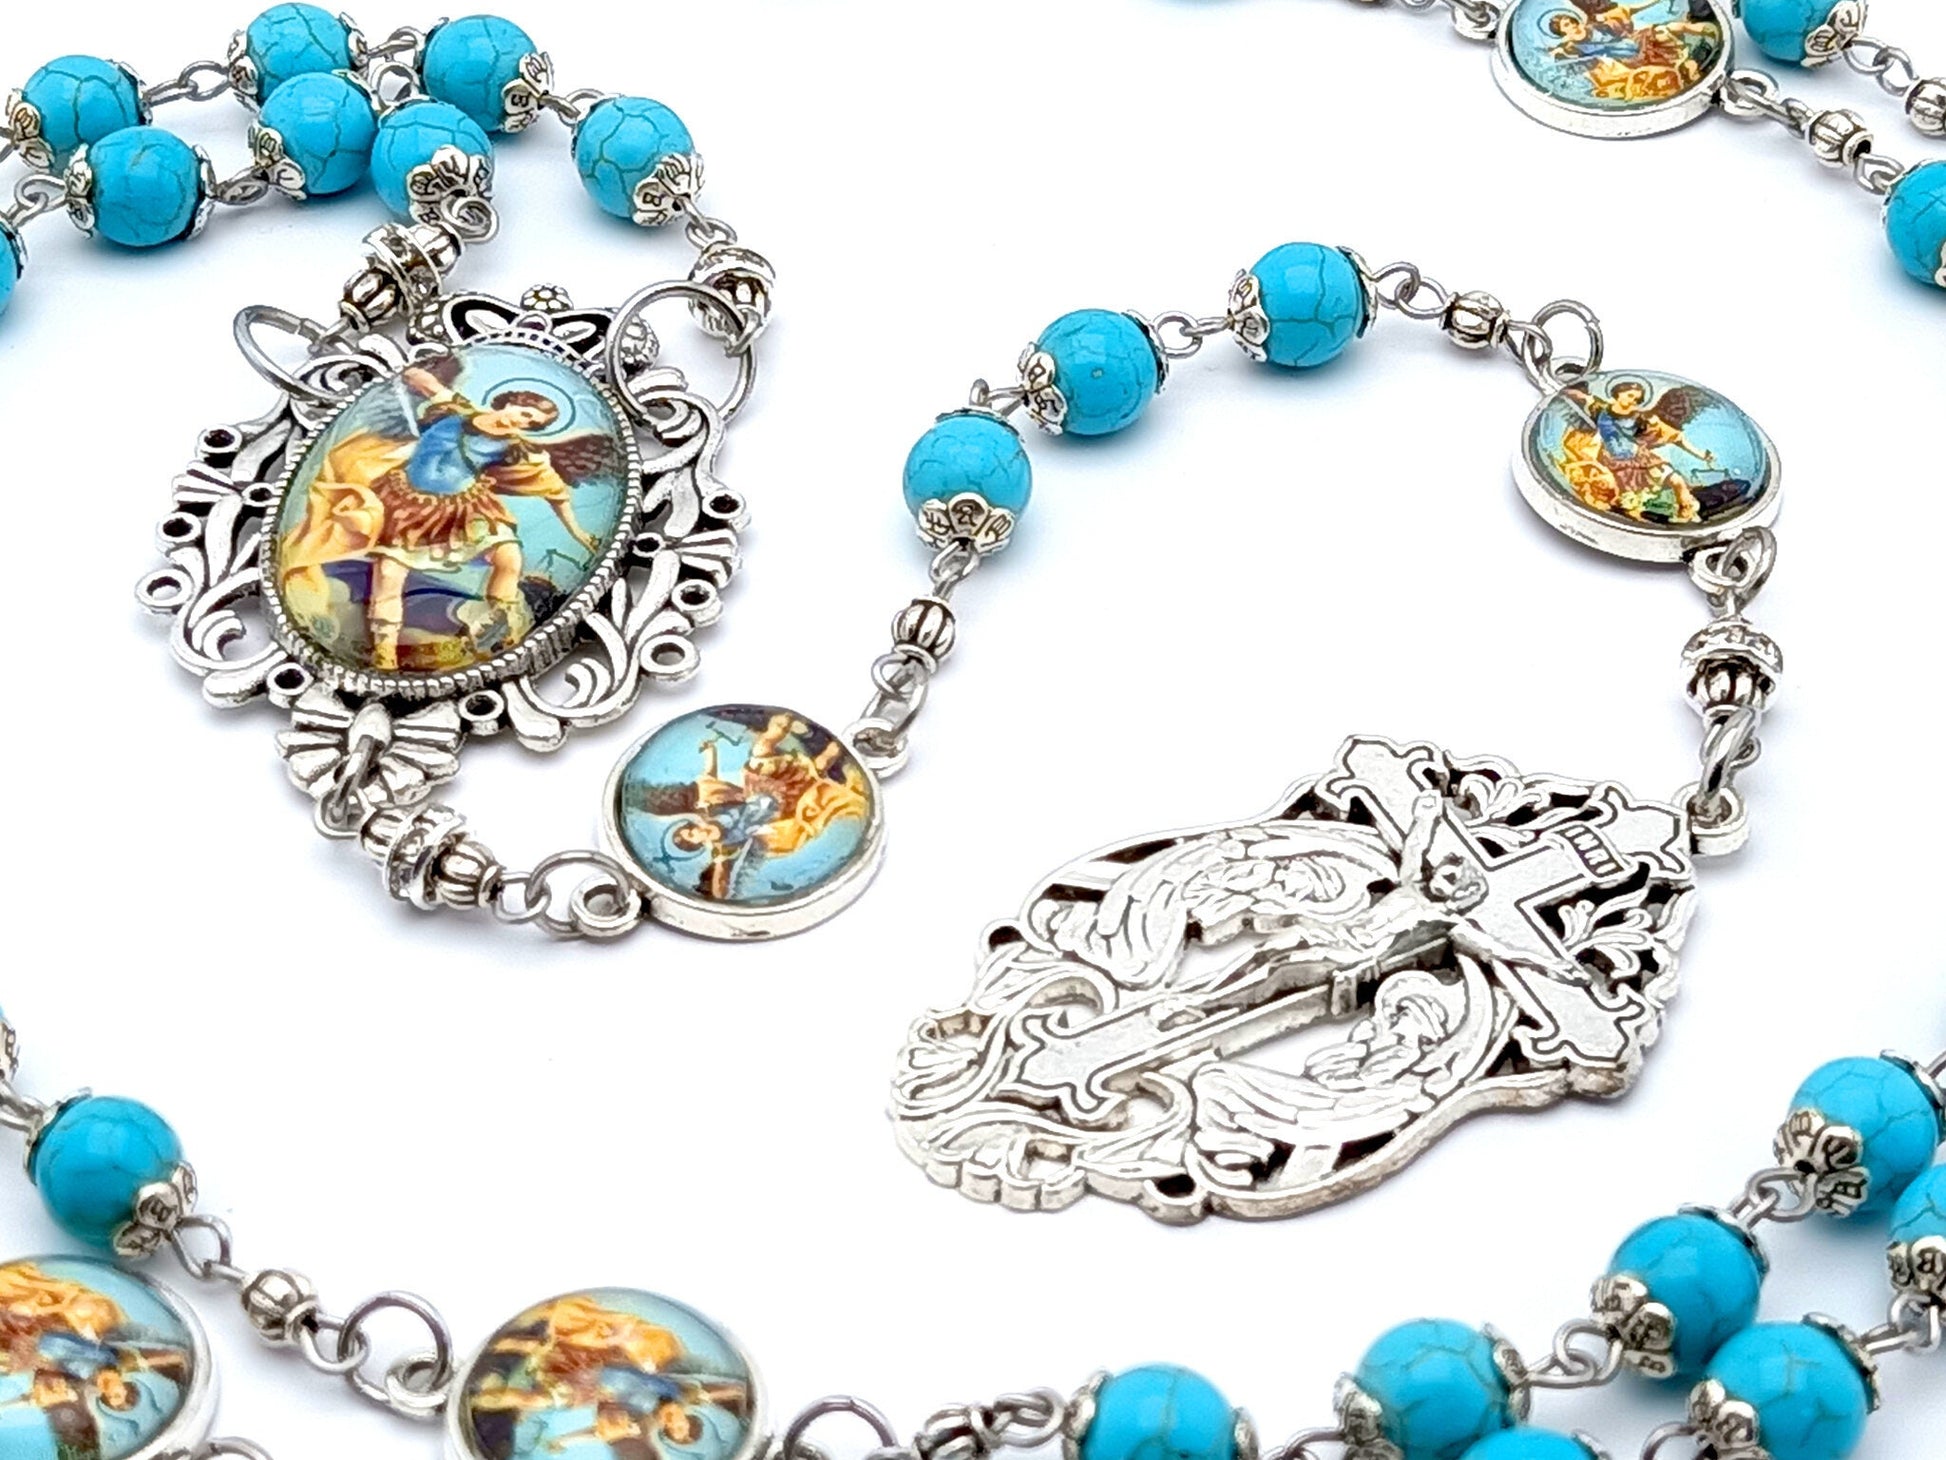 Saint Michael unique rosary beads with turquoise gemstone and stainless steel picture beads, silver Holy Angels crucifix and picture centre medal.